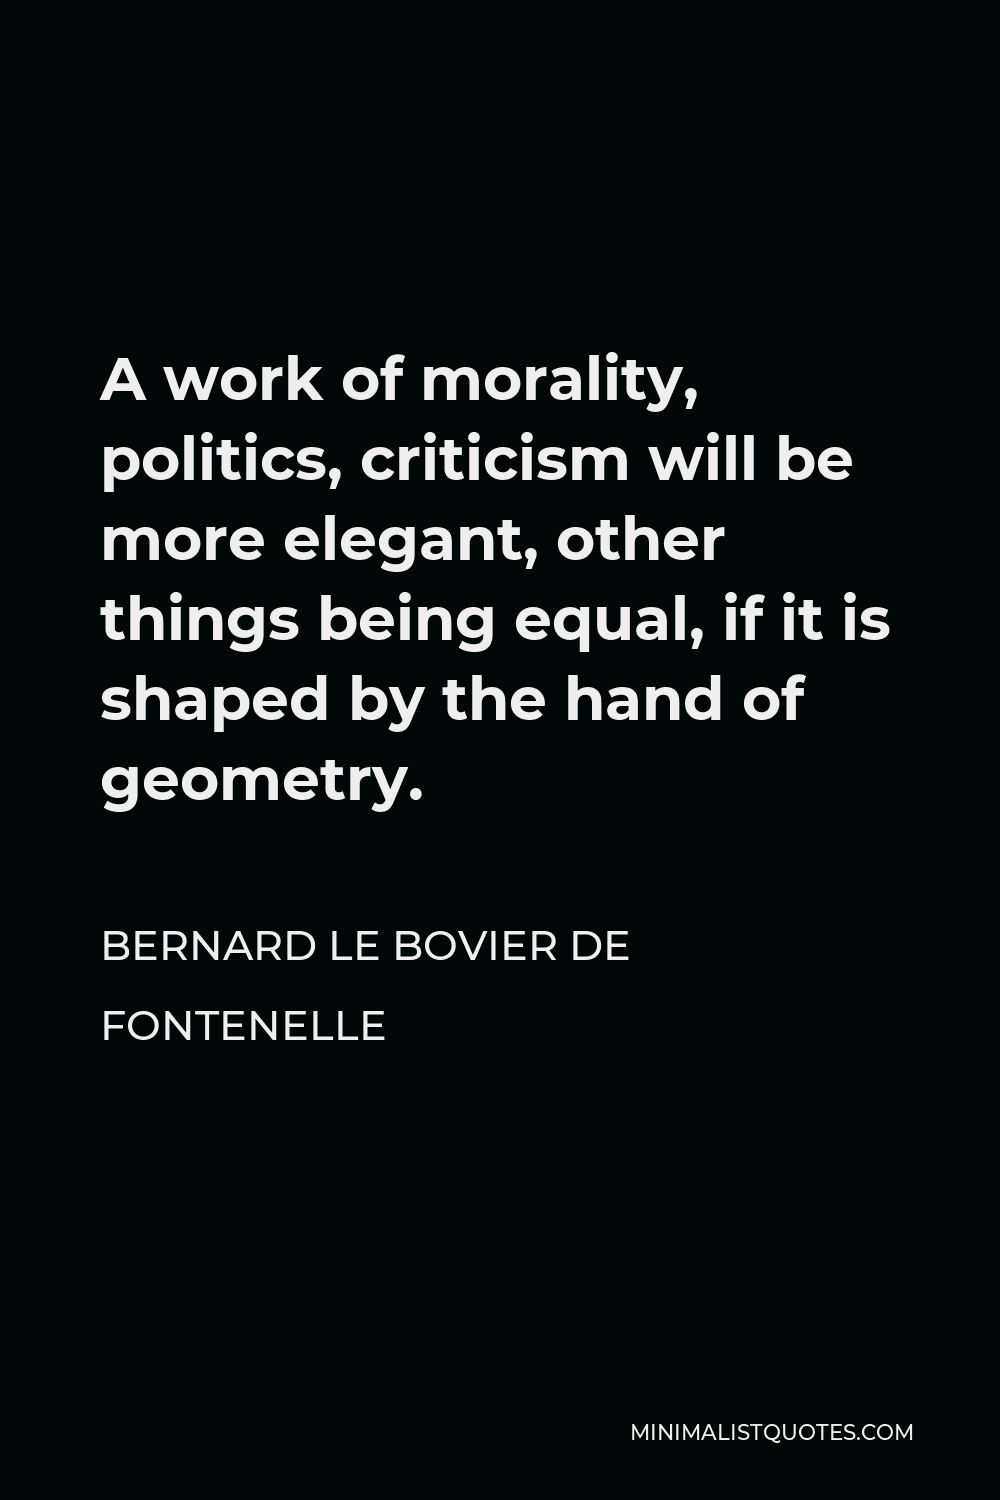 Bernard le Bovier de Fontenelle Quote - A work of morality, politics, criticism will be more elegant, other things being equal, if it is shaped by the hand of geometry.